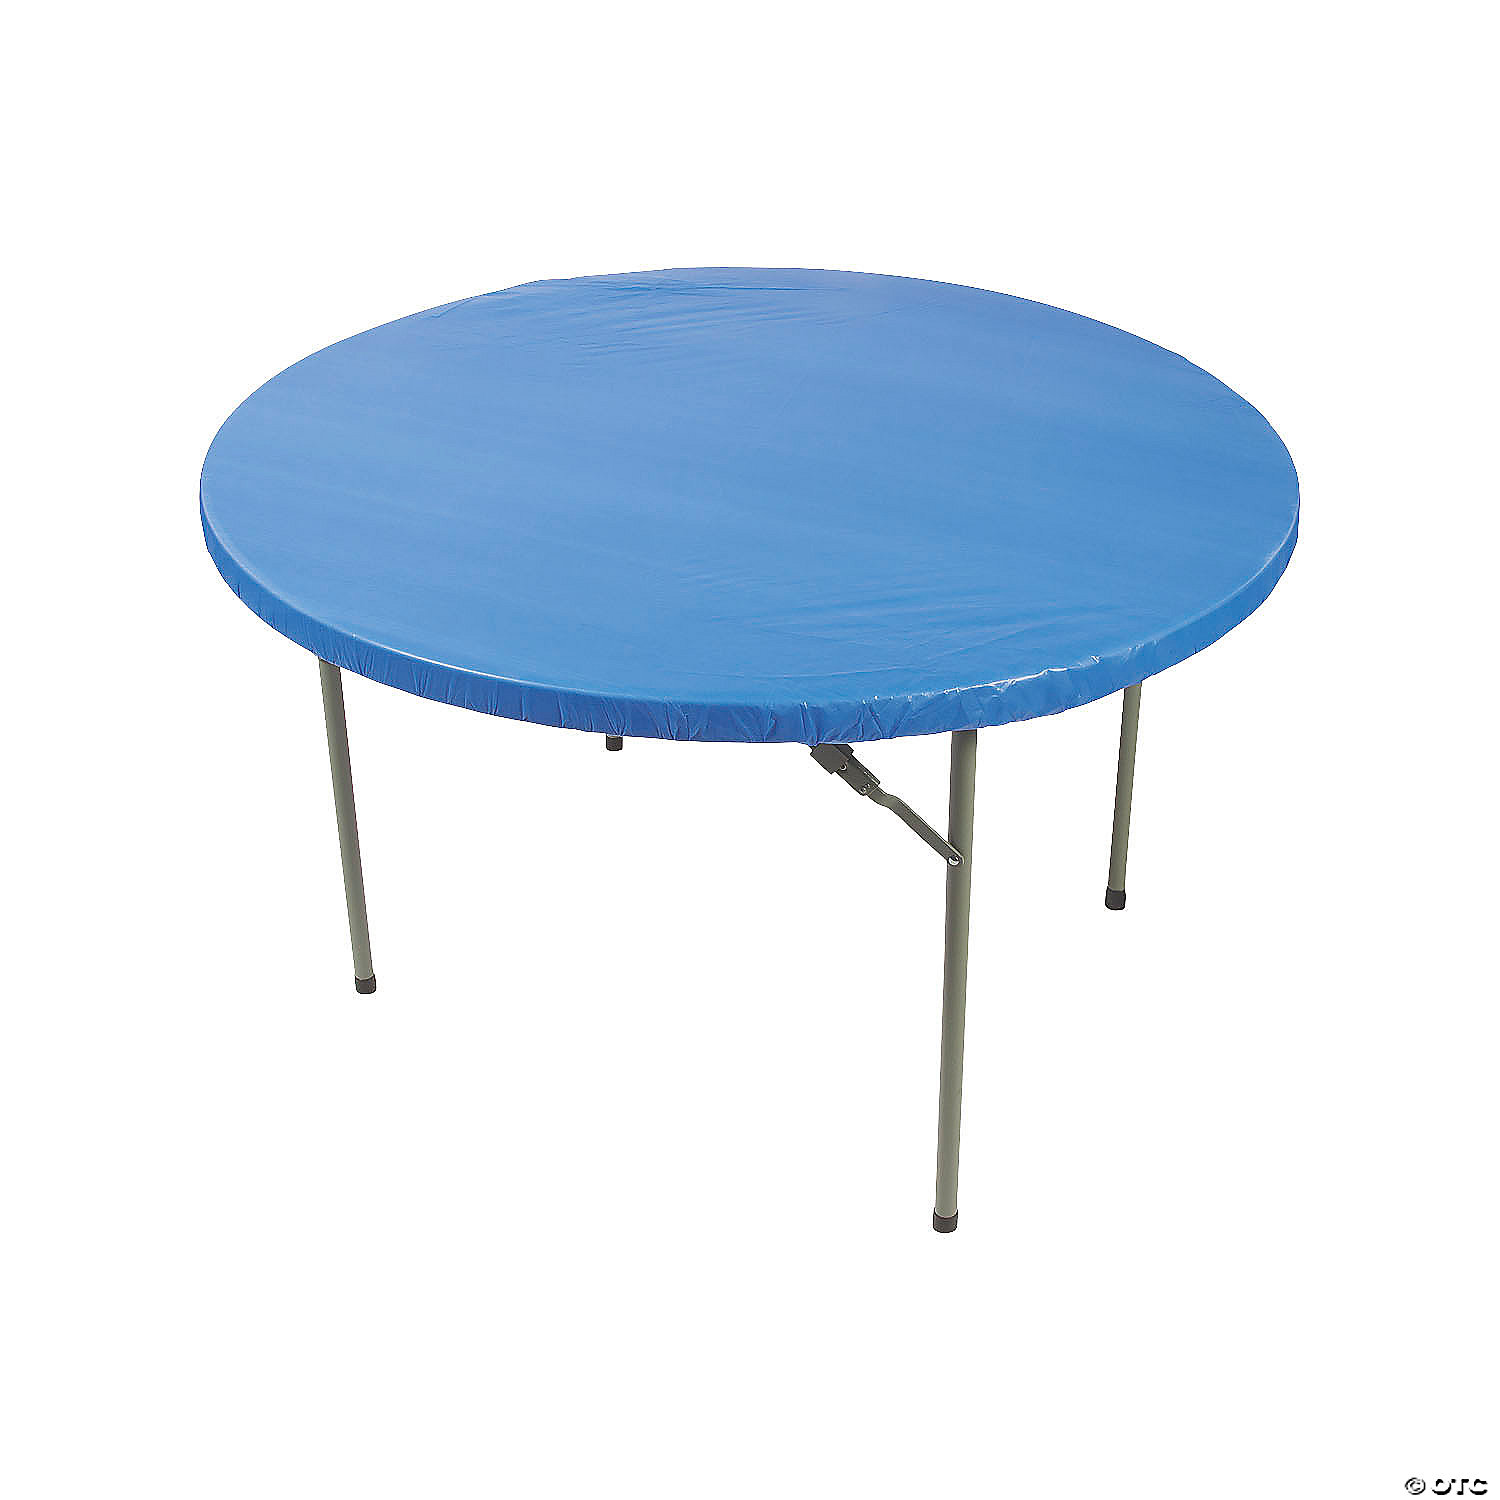 Fitted Round Plastic Tablecloth, 60 Inch Round Plastic Tablecloths With Elastic